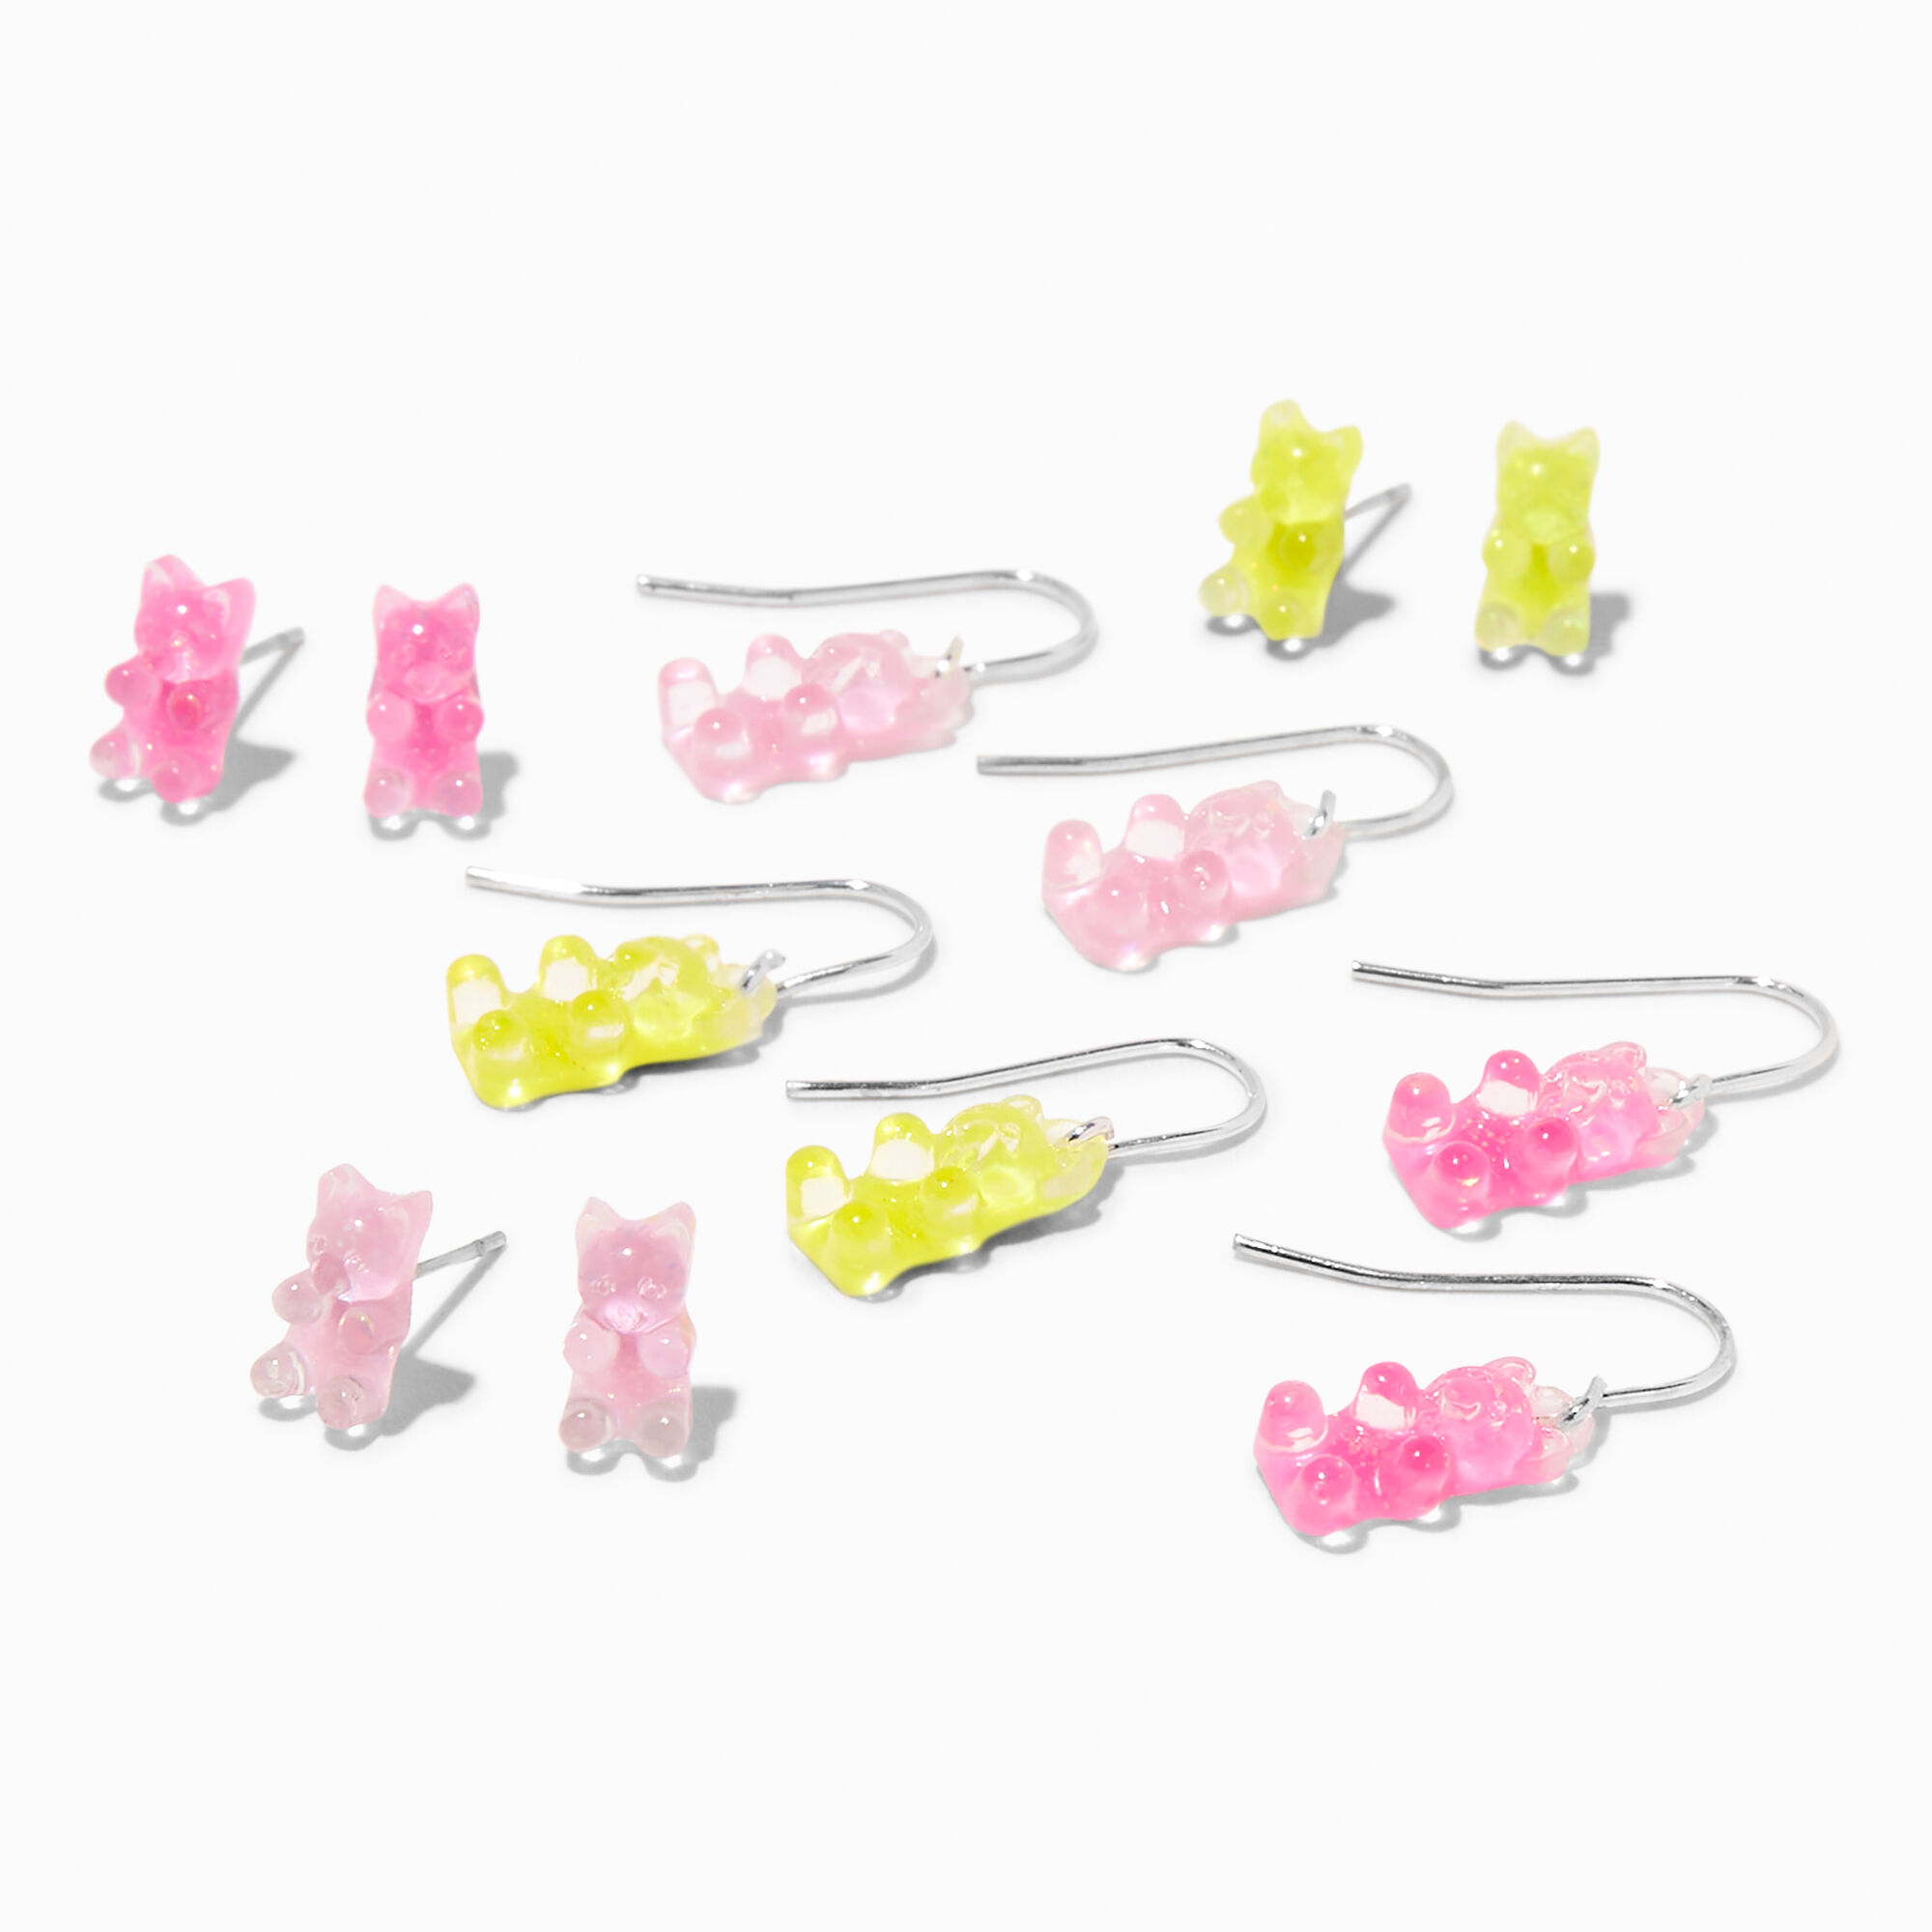  Claire's Glow In The Dark Gummy Bear Earrings - 3 Pairs of 1''  Drop Earrings Silver Pastel Colored Sweet Treat Food Theme Accessories for  Girls: Clothing, Shoes & Jewelry